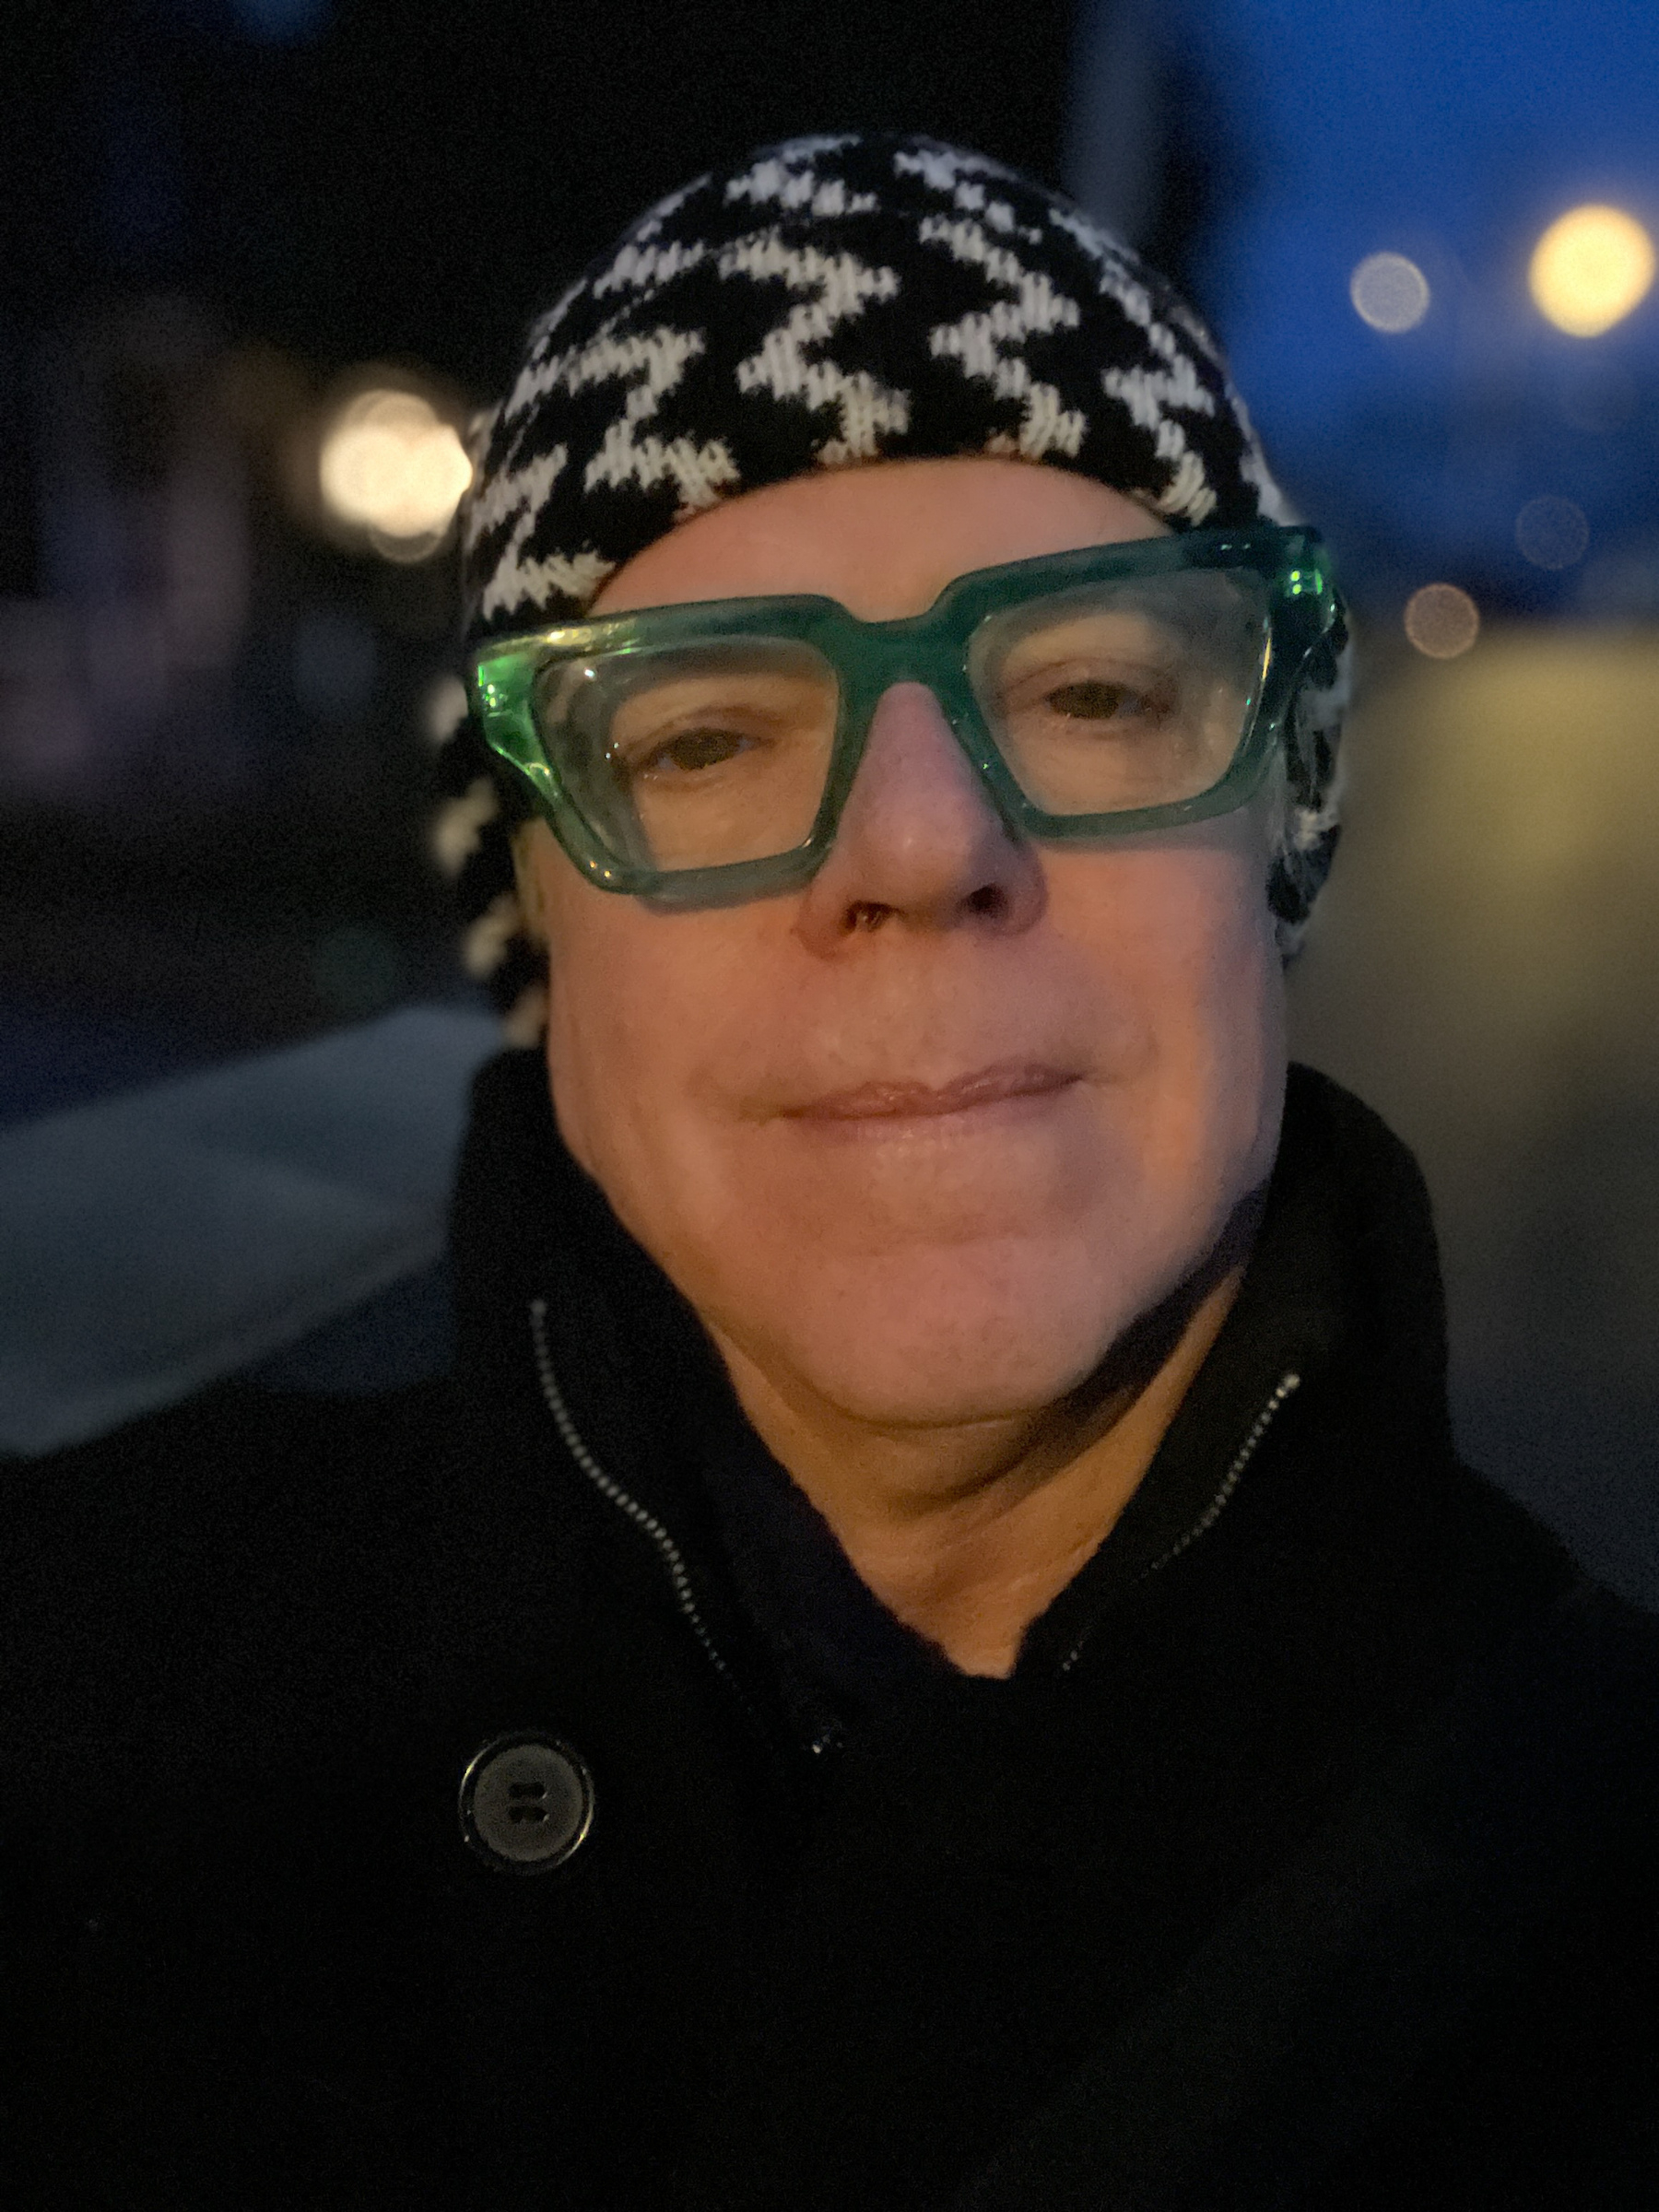 Self portrait with black and white zig-zag knit cap, green crystal frame glasses, illuminated by streetlight.